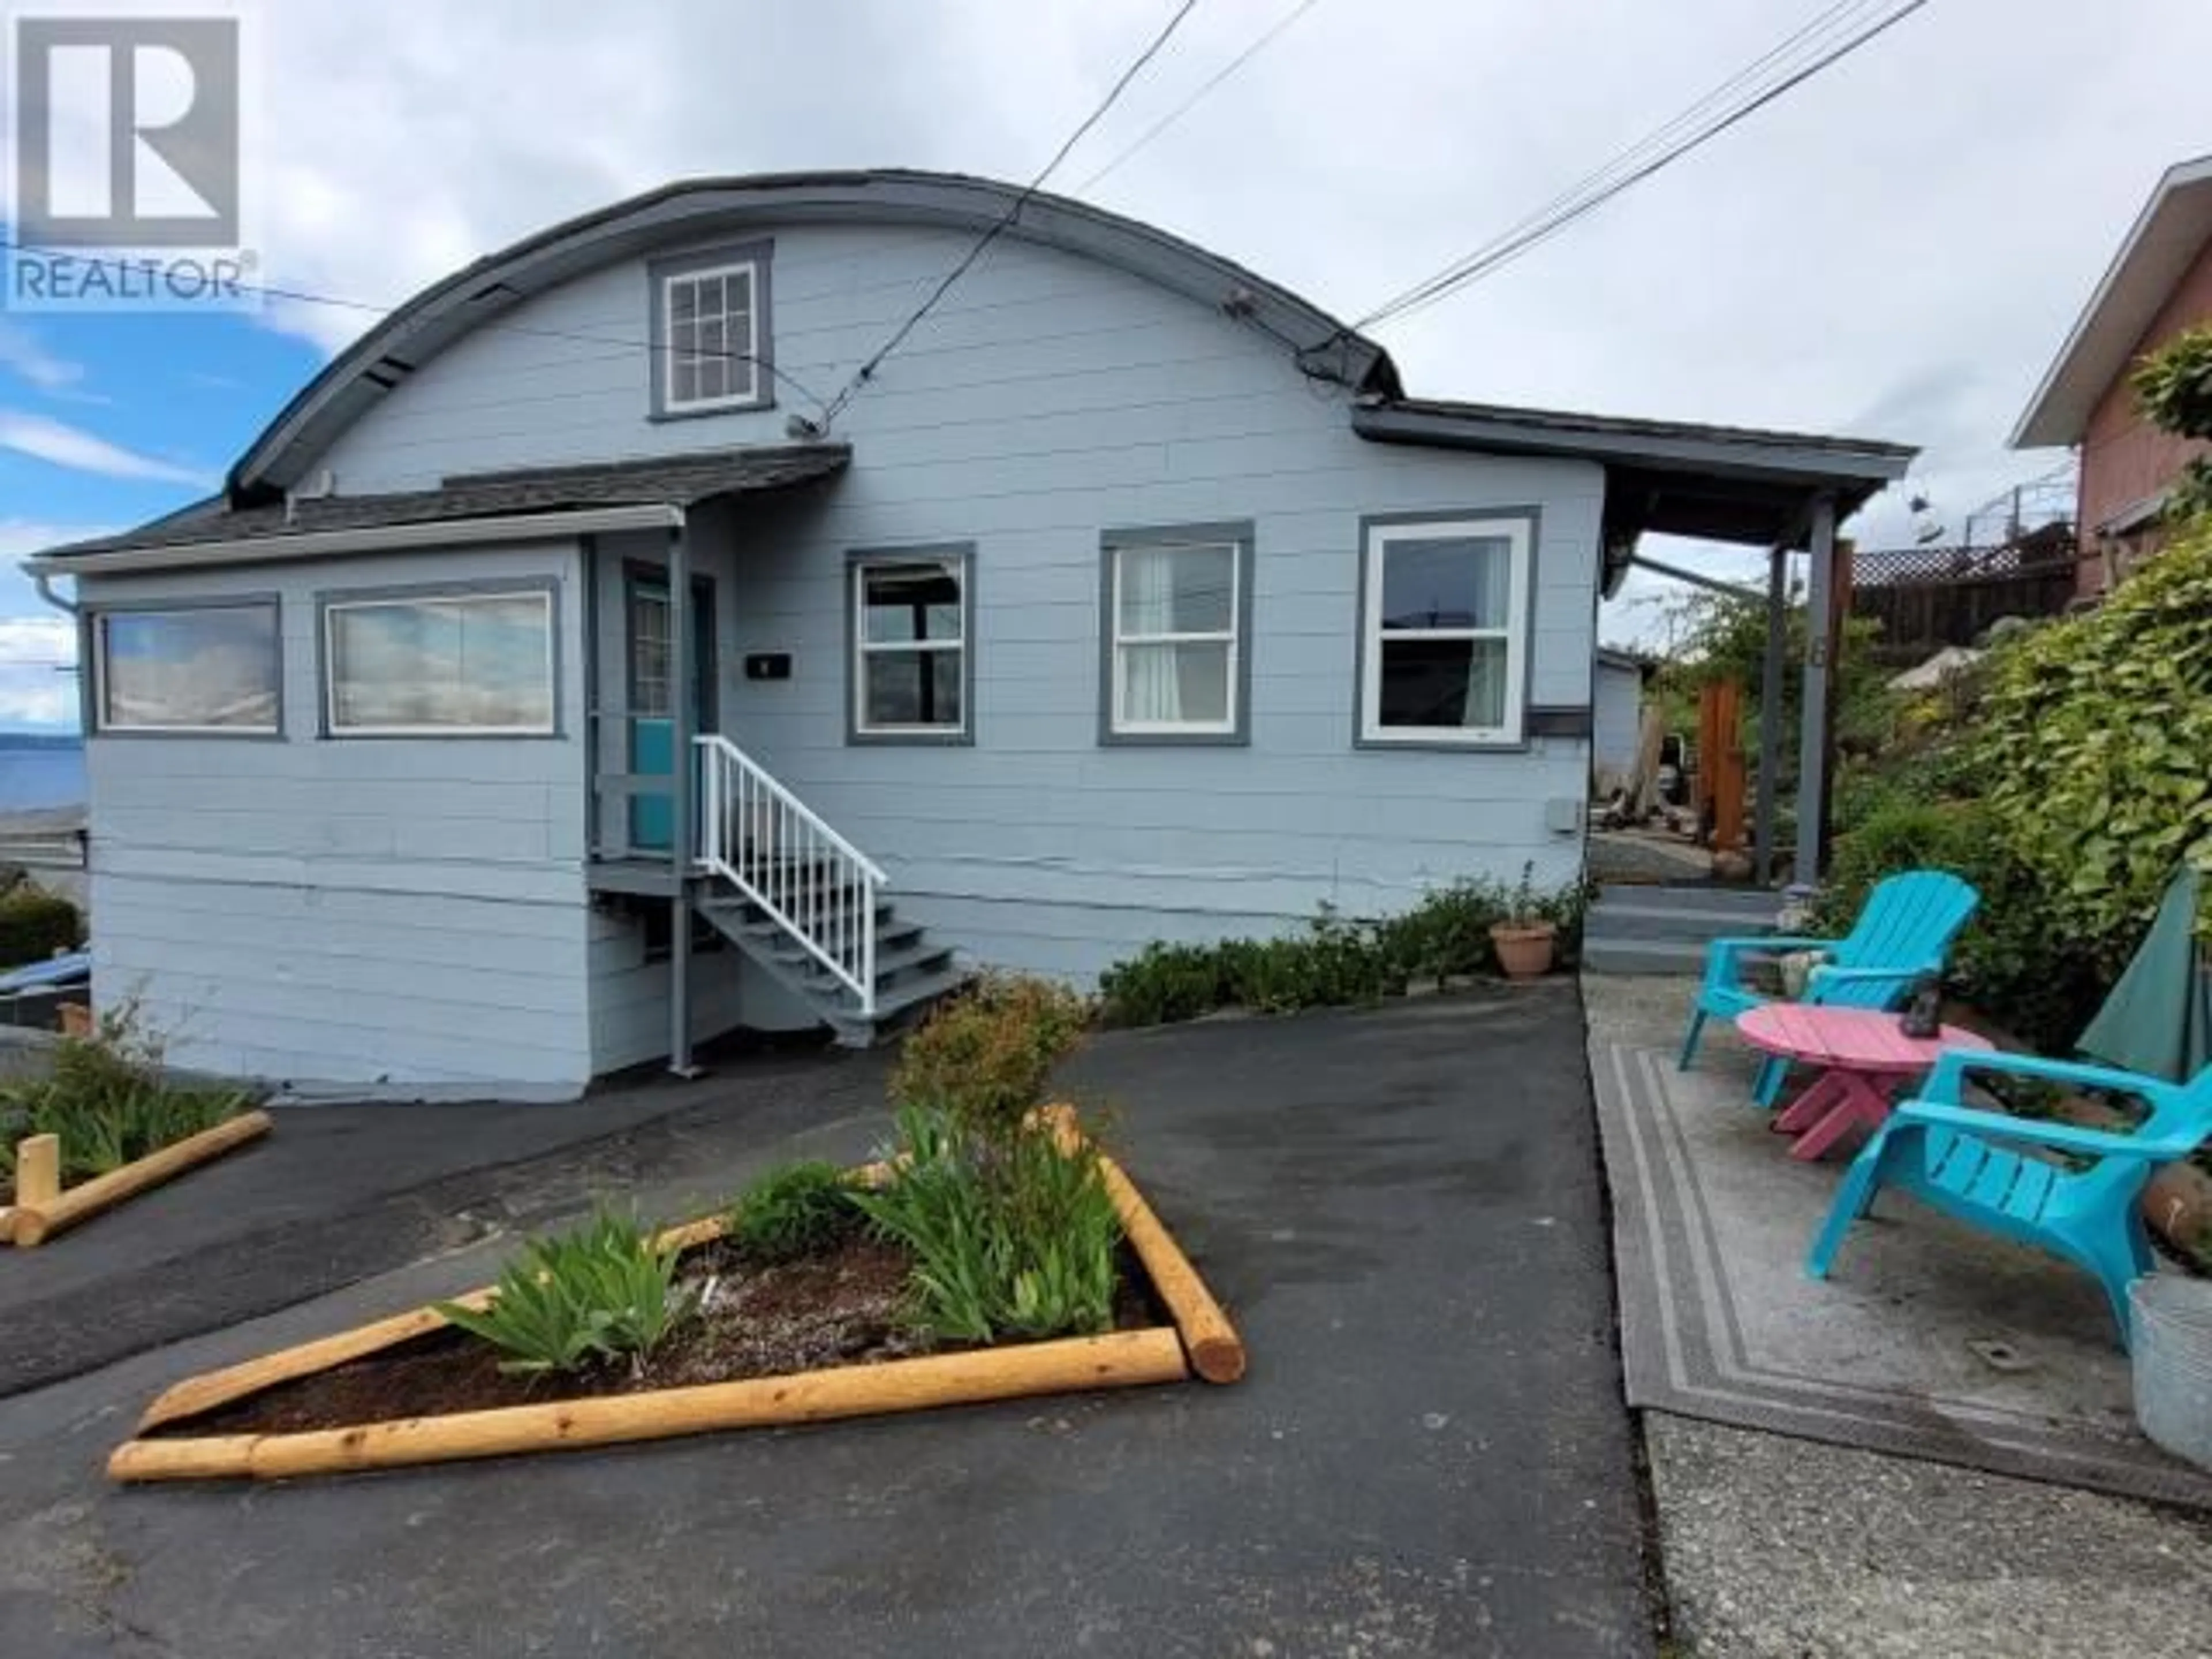 A pic from exterior of the house or condo for 1-6-6865 DUNCAN STREET, Powell River British Columbia V8A1V1